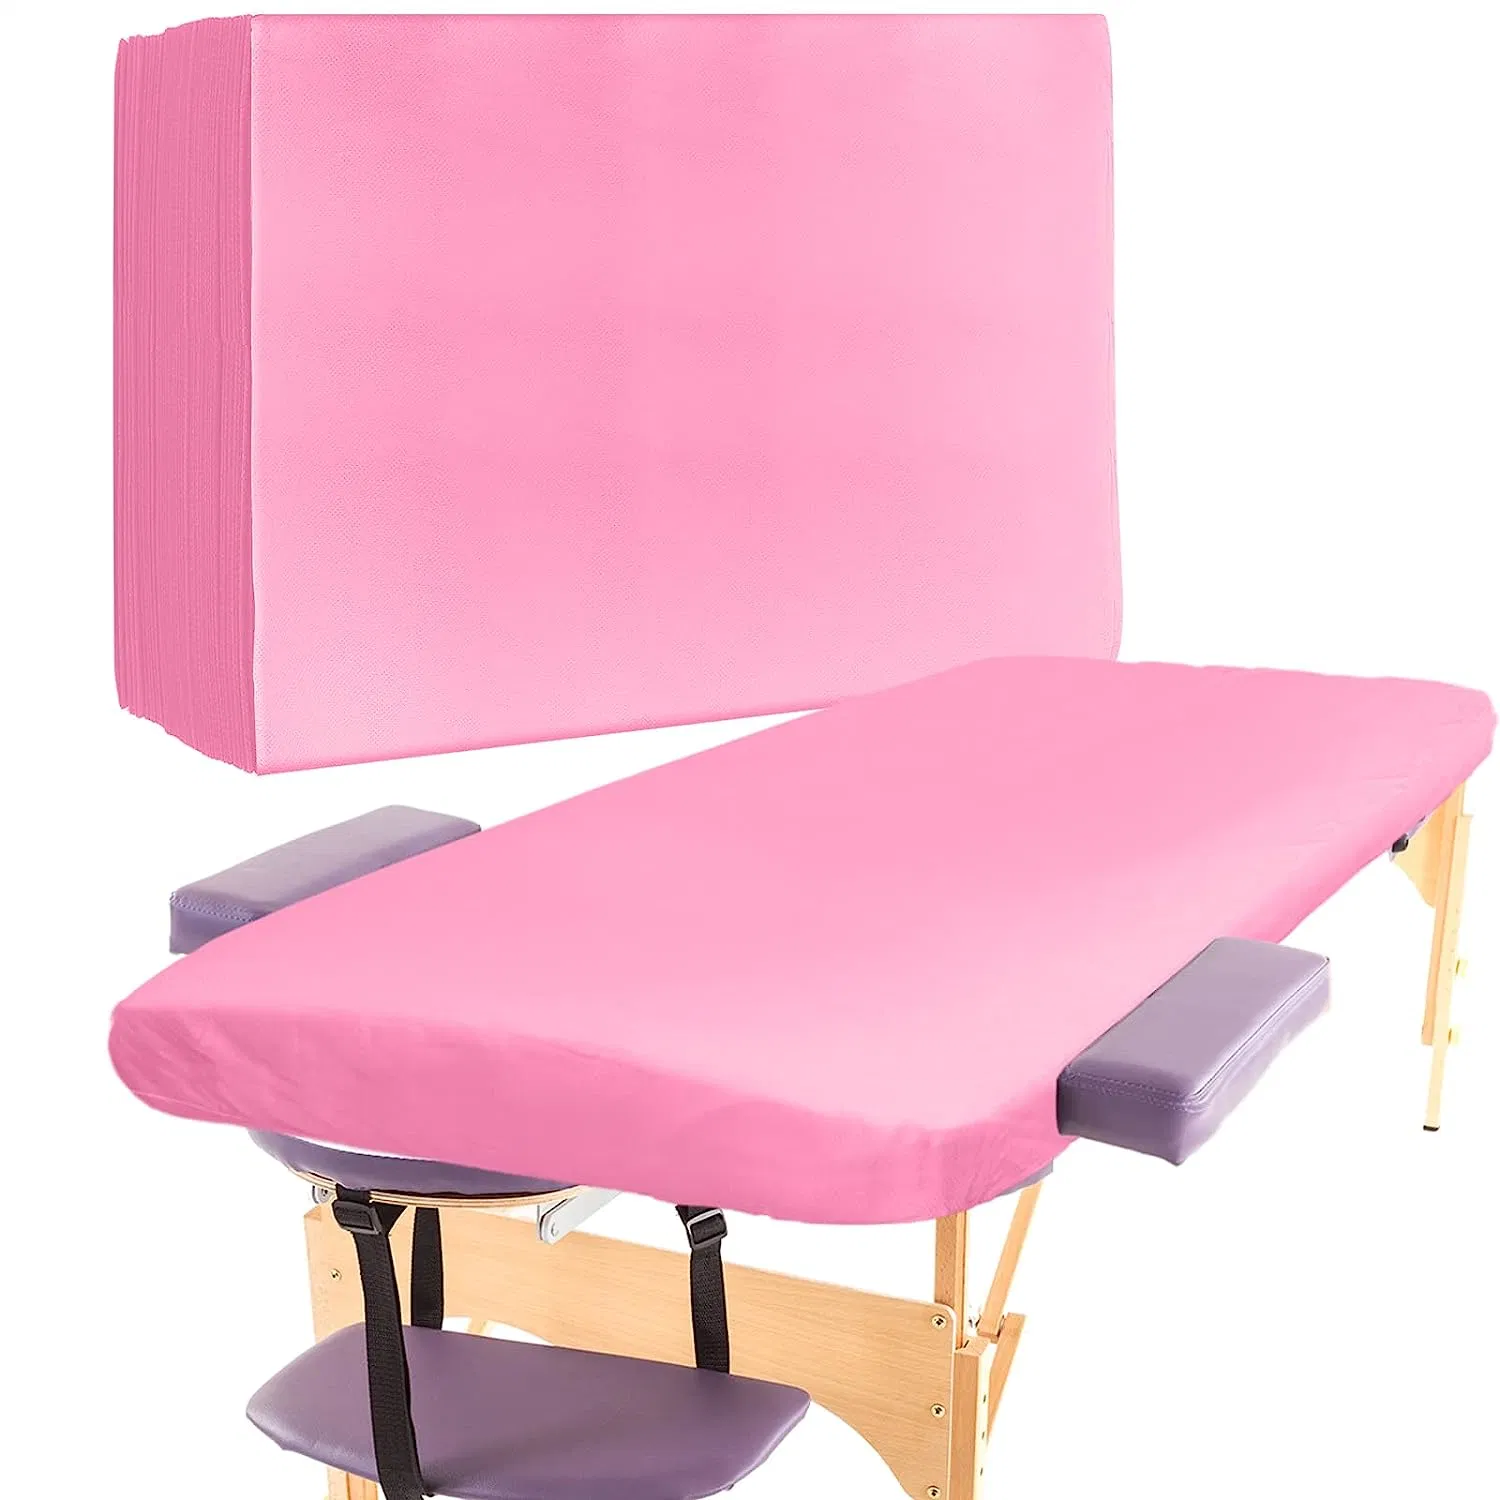 Disposable Bed Sheets Massage Table Sheet Waterproof Bed Cover Non-Woven Fabric for SPA Beauty Salon Table Sheets